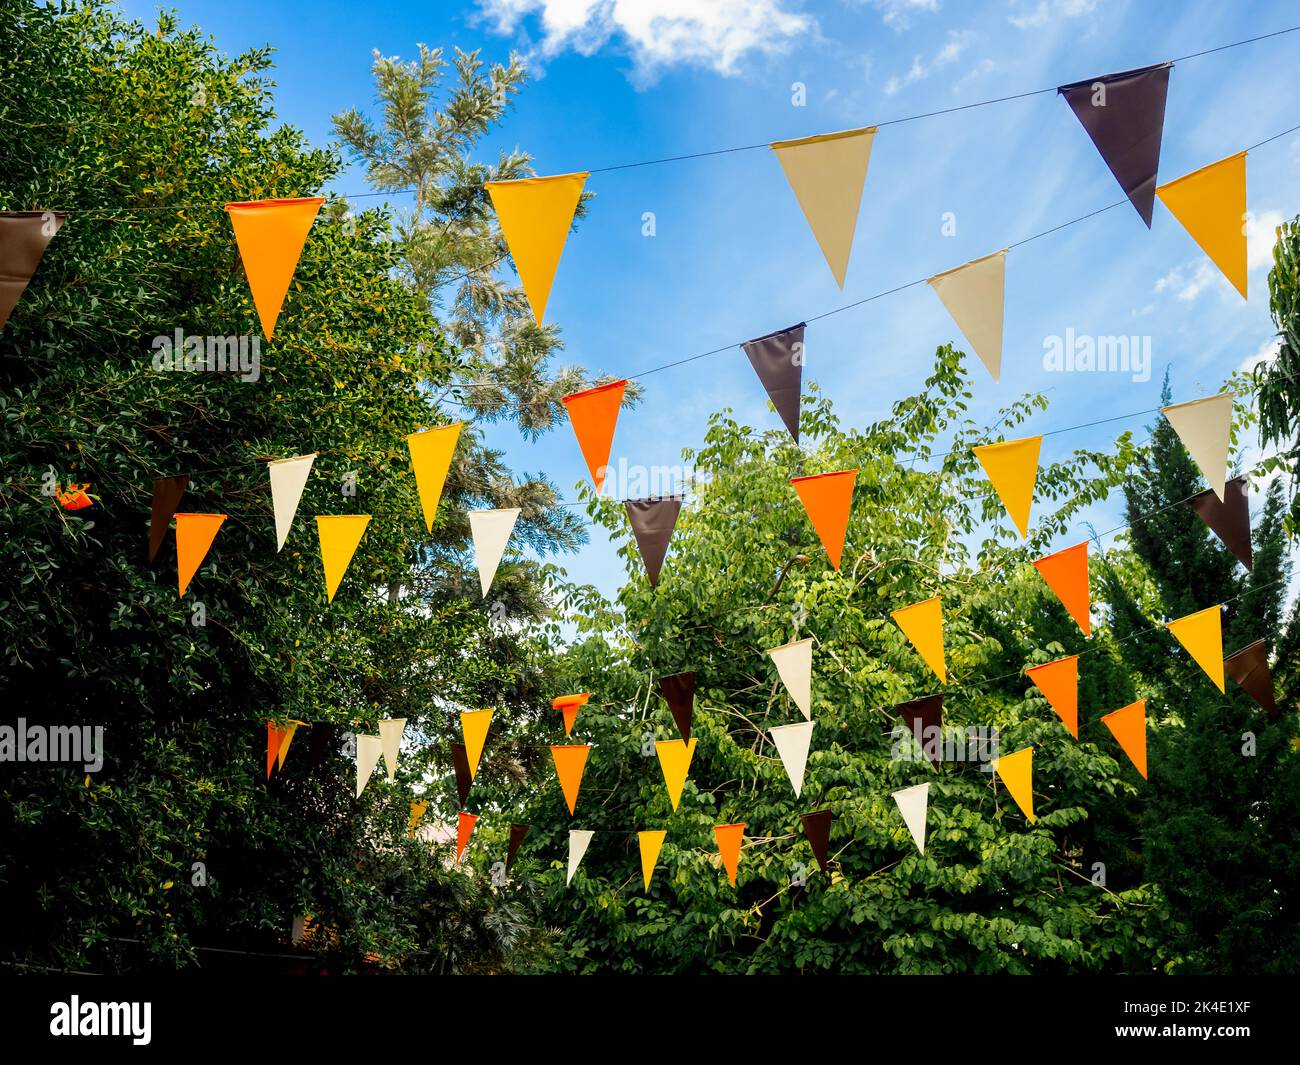 Event outdoor party ornamented with orange, yellow, brown, and white color tone flags in green garden on blue sky background. Colorful triangular flag Stock Photo